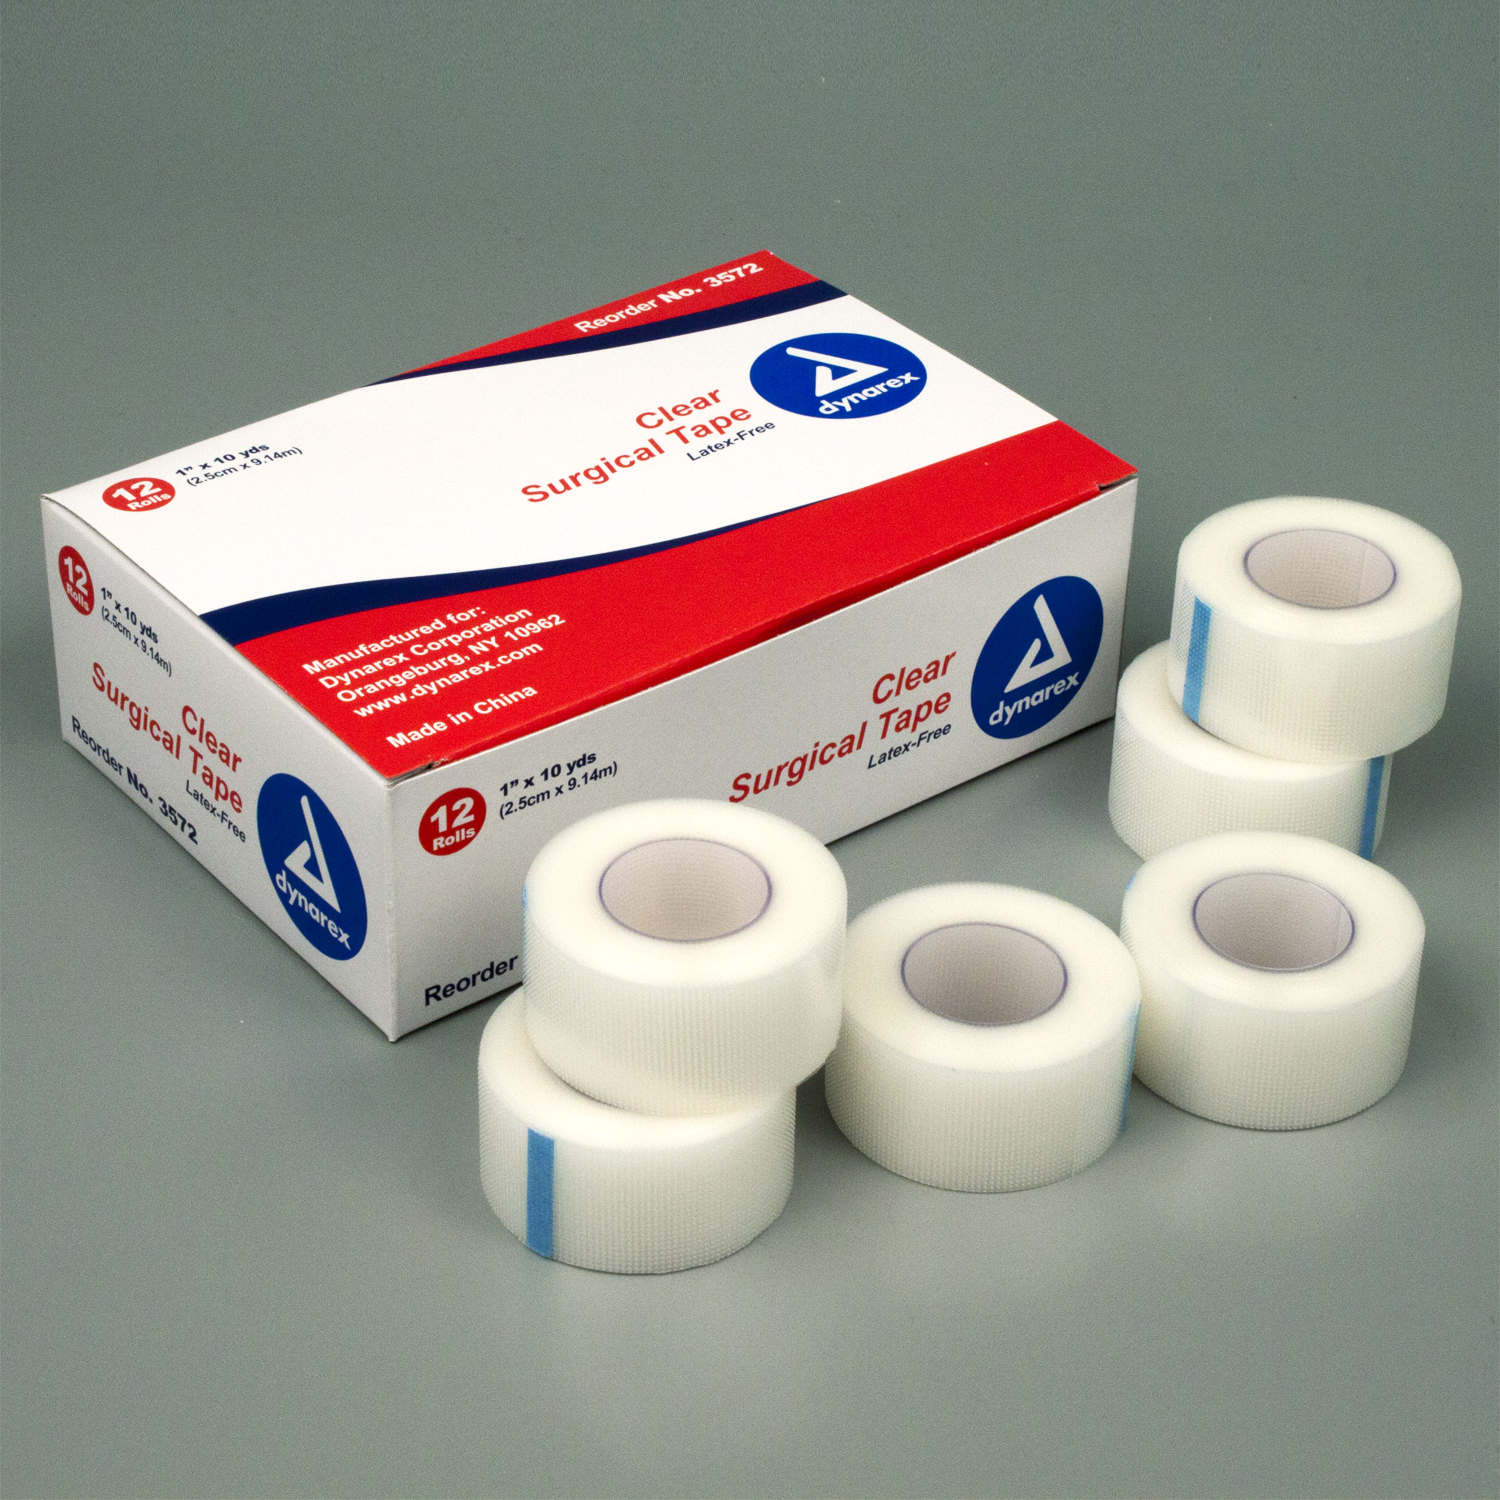 1 Inch Clear Surgical Tape: Box of 12 image